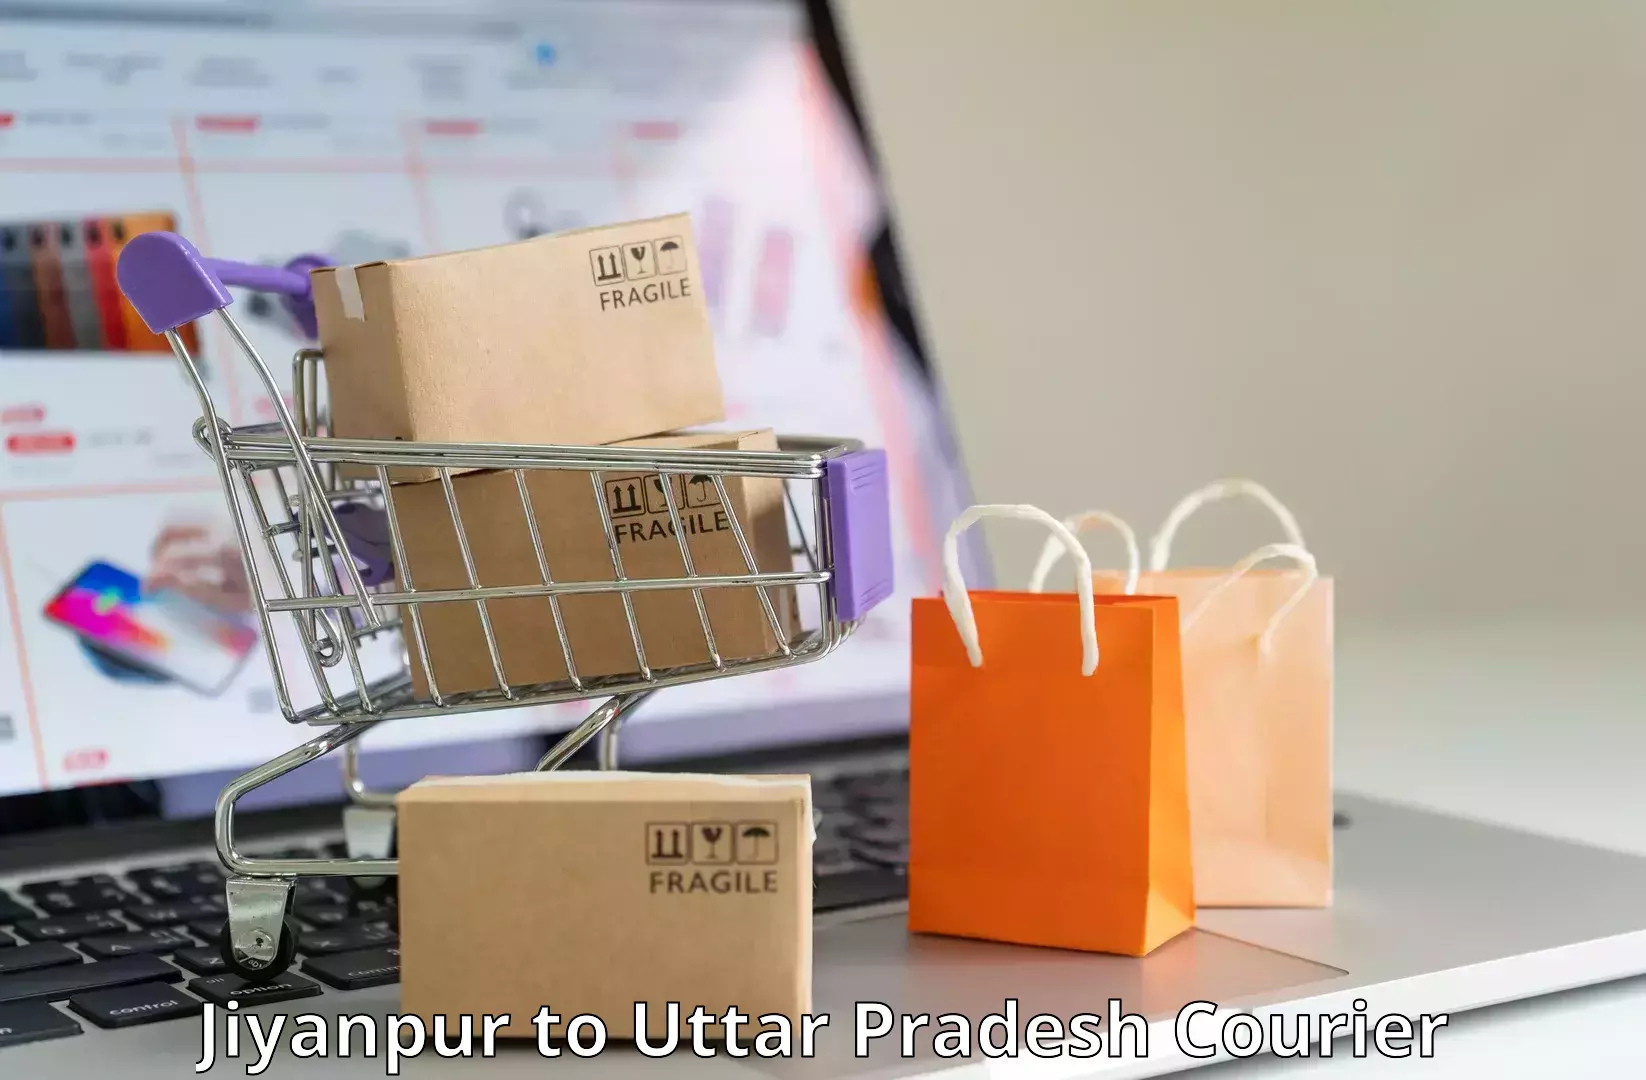 Domestic courier Jiyanpur to Malihabad